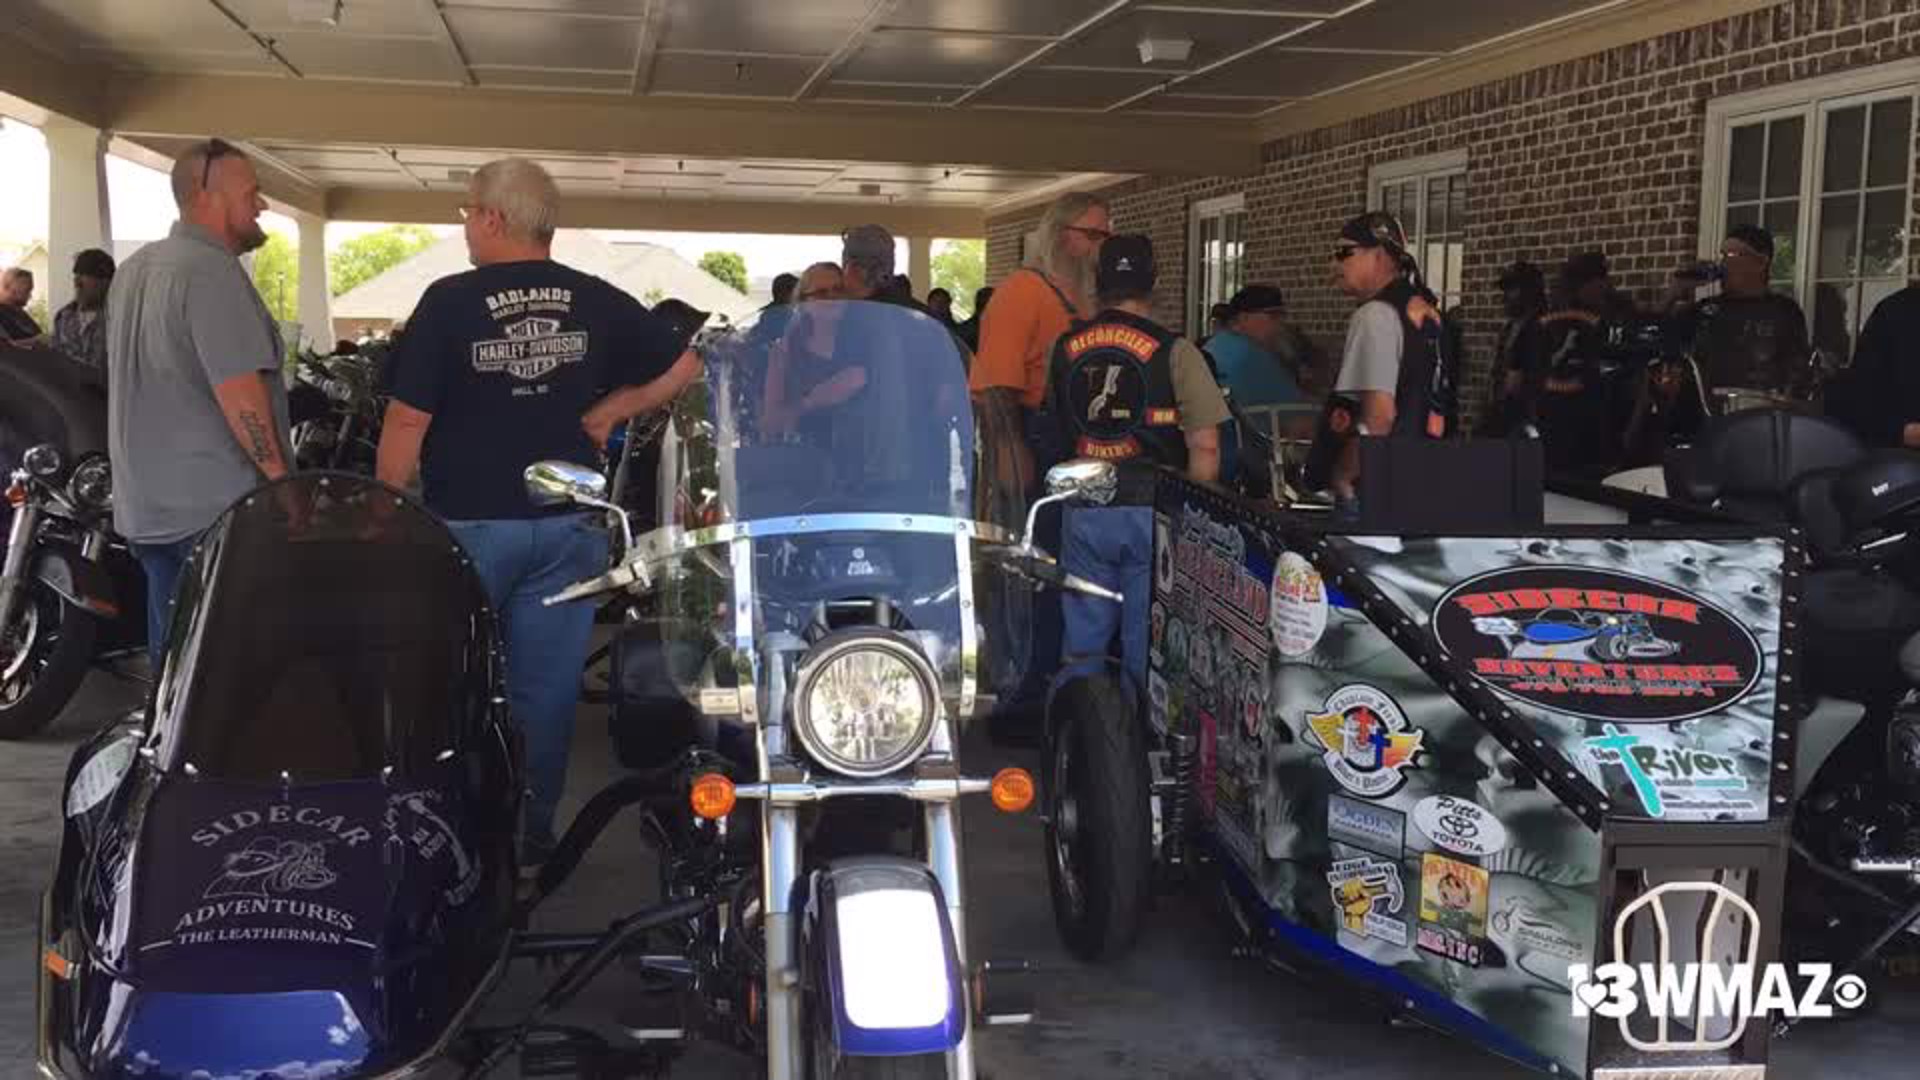 Hundreds of bikers gathered to lead a funeral procession for 14-year-old Robert 'Lil Man' Davis, who died this week after suffering from a heart condition. Davis' family asked the bikers to lead.